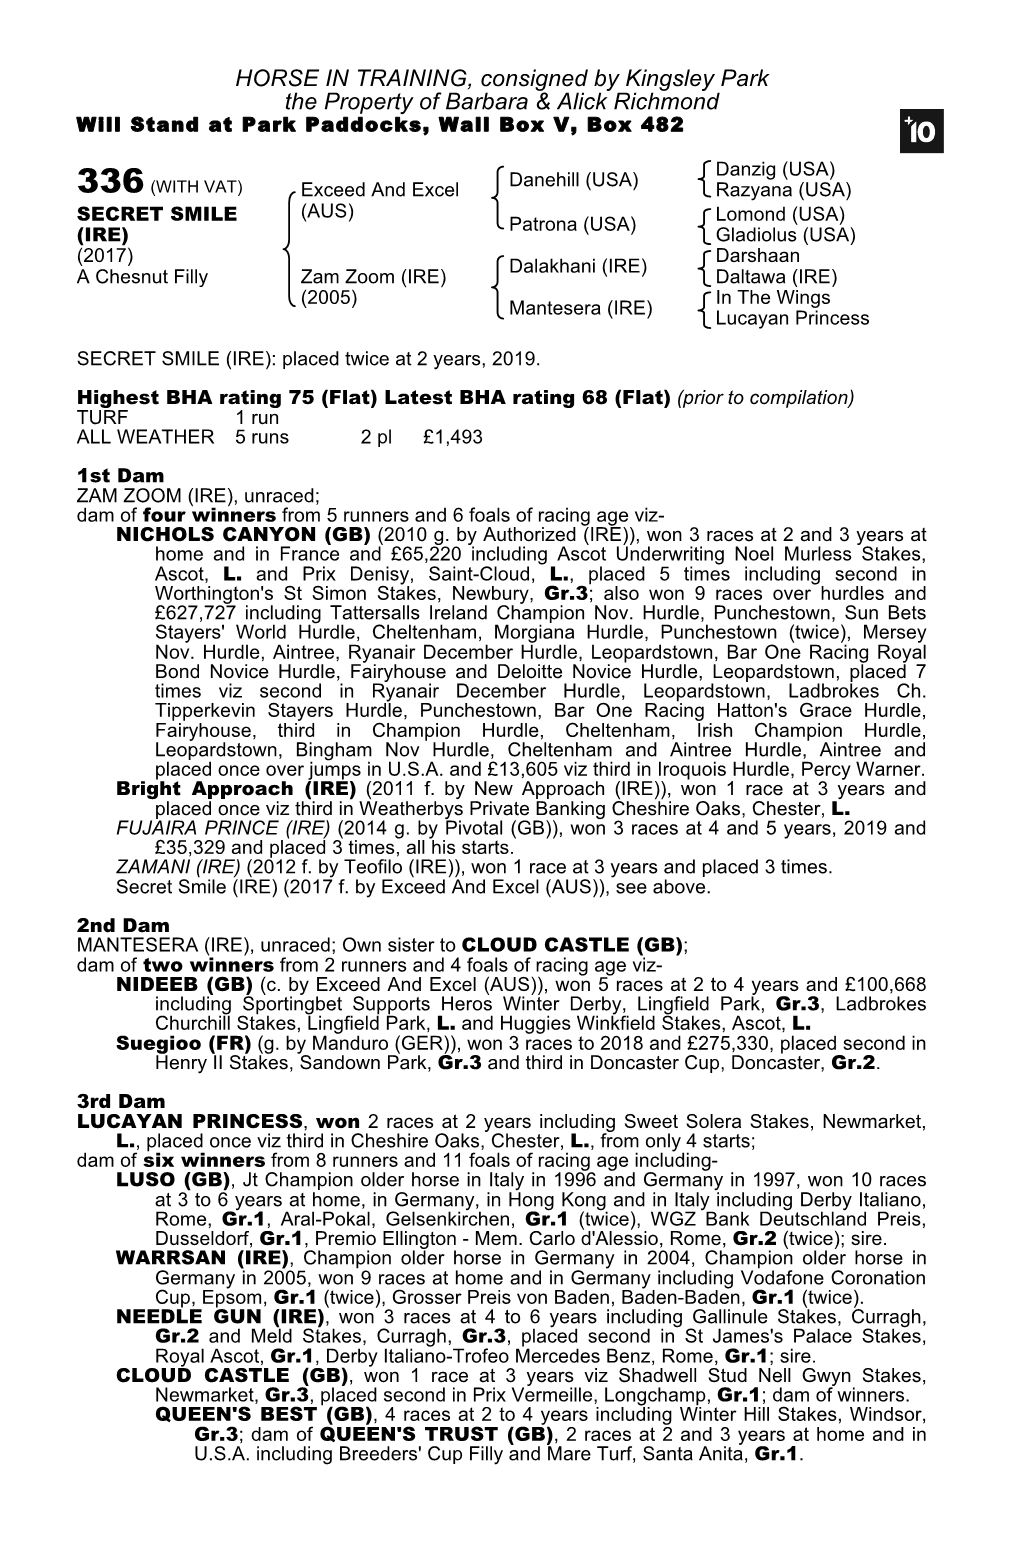 HORSE in TRAINING, Consigned by Kingsley Park the Property of Barbara & Alick Richmond Will Stand at Park Paddocks, Wall Box V, Box 482